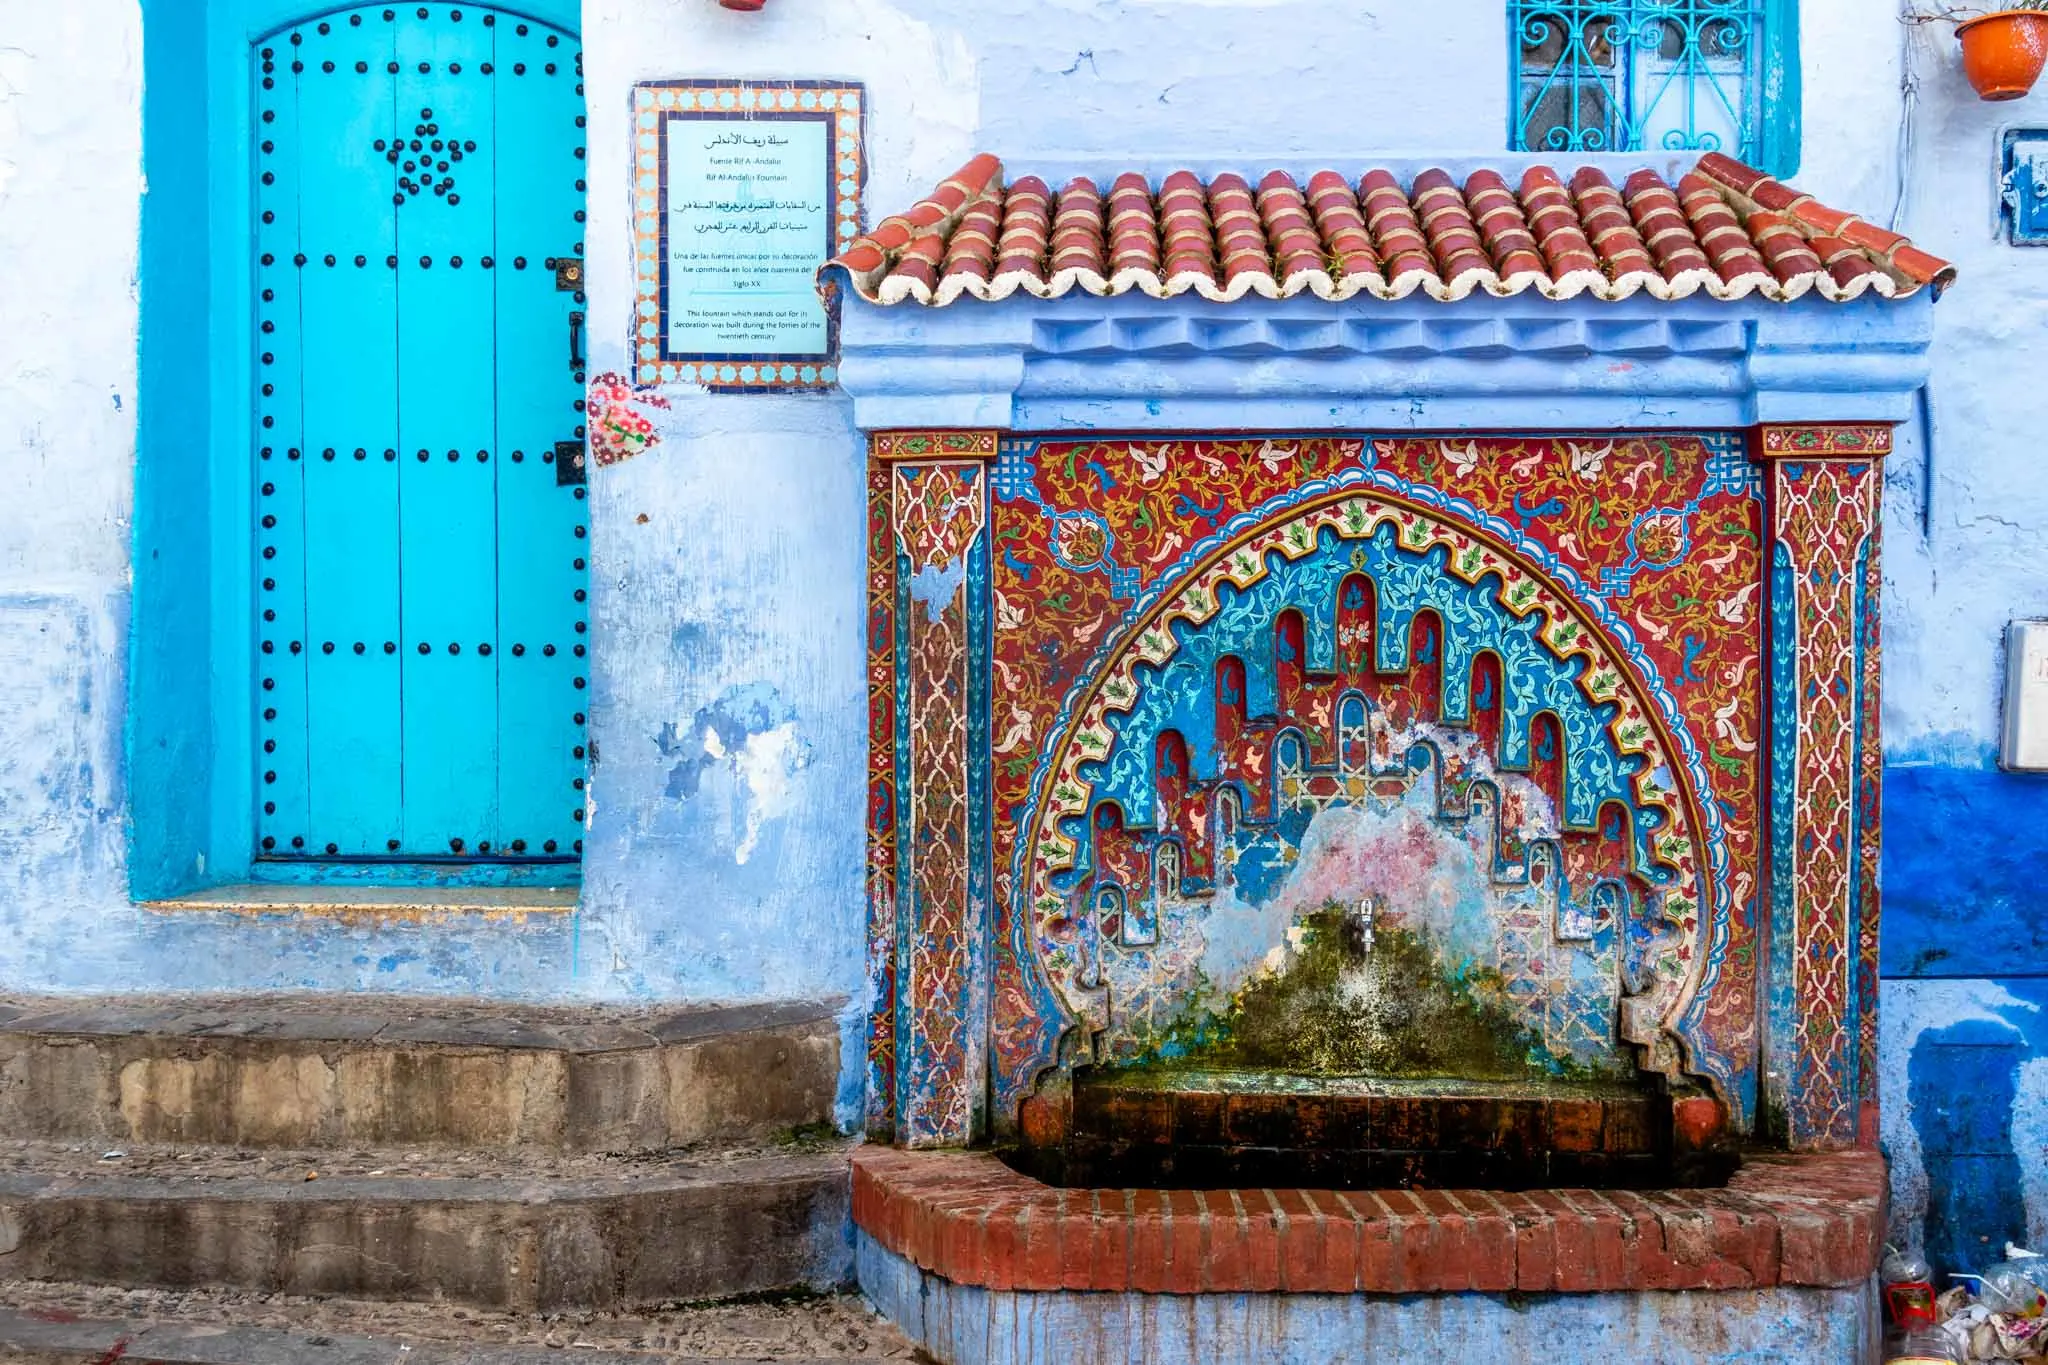 Red and blue decorated fountain next to a turquoise door